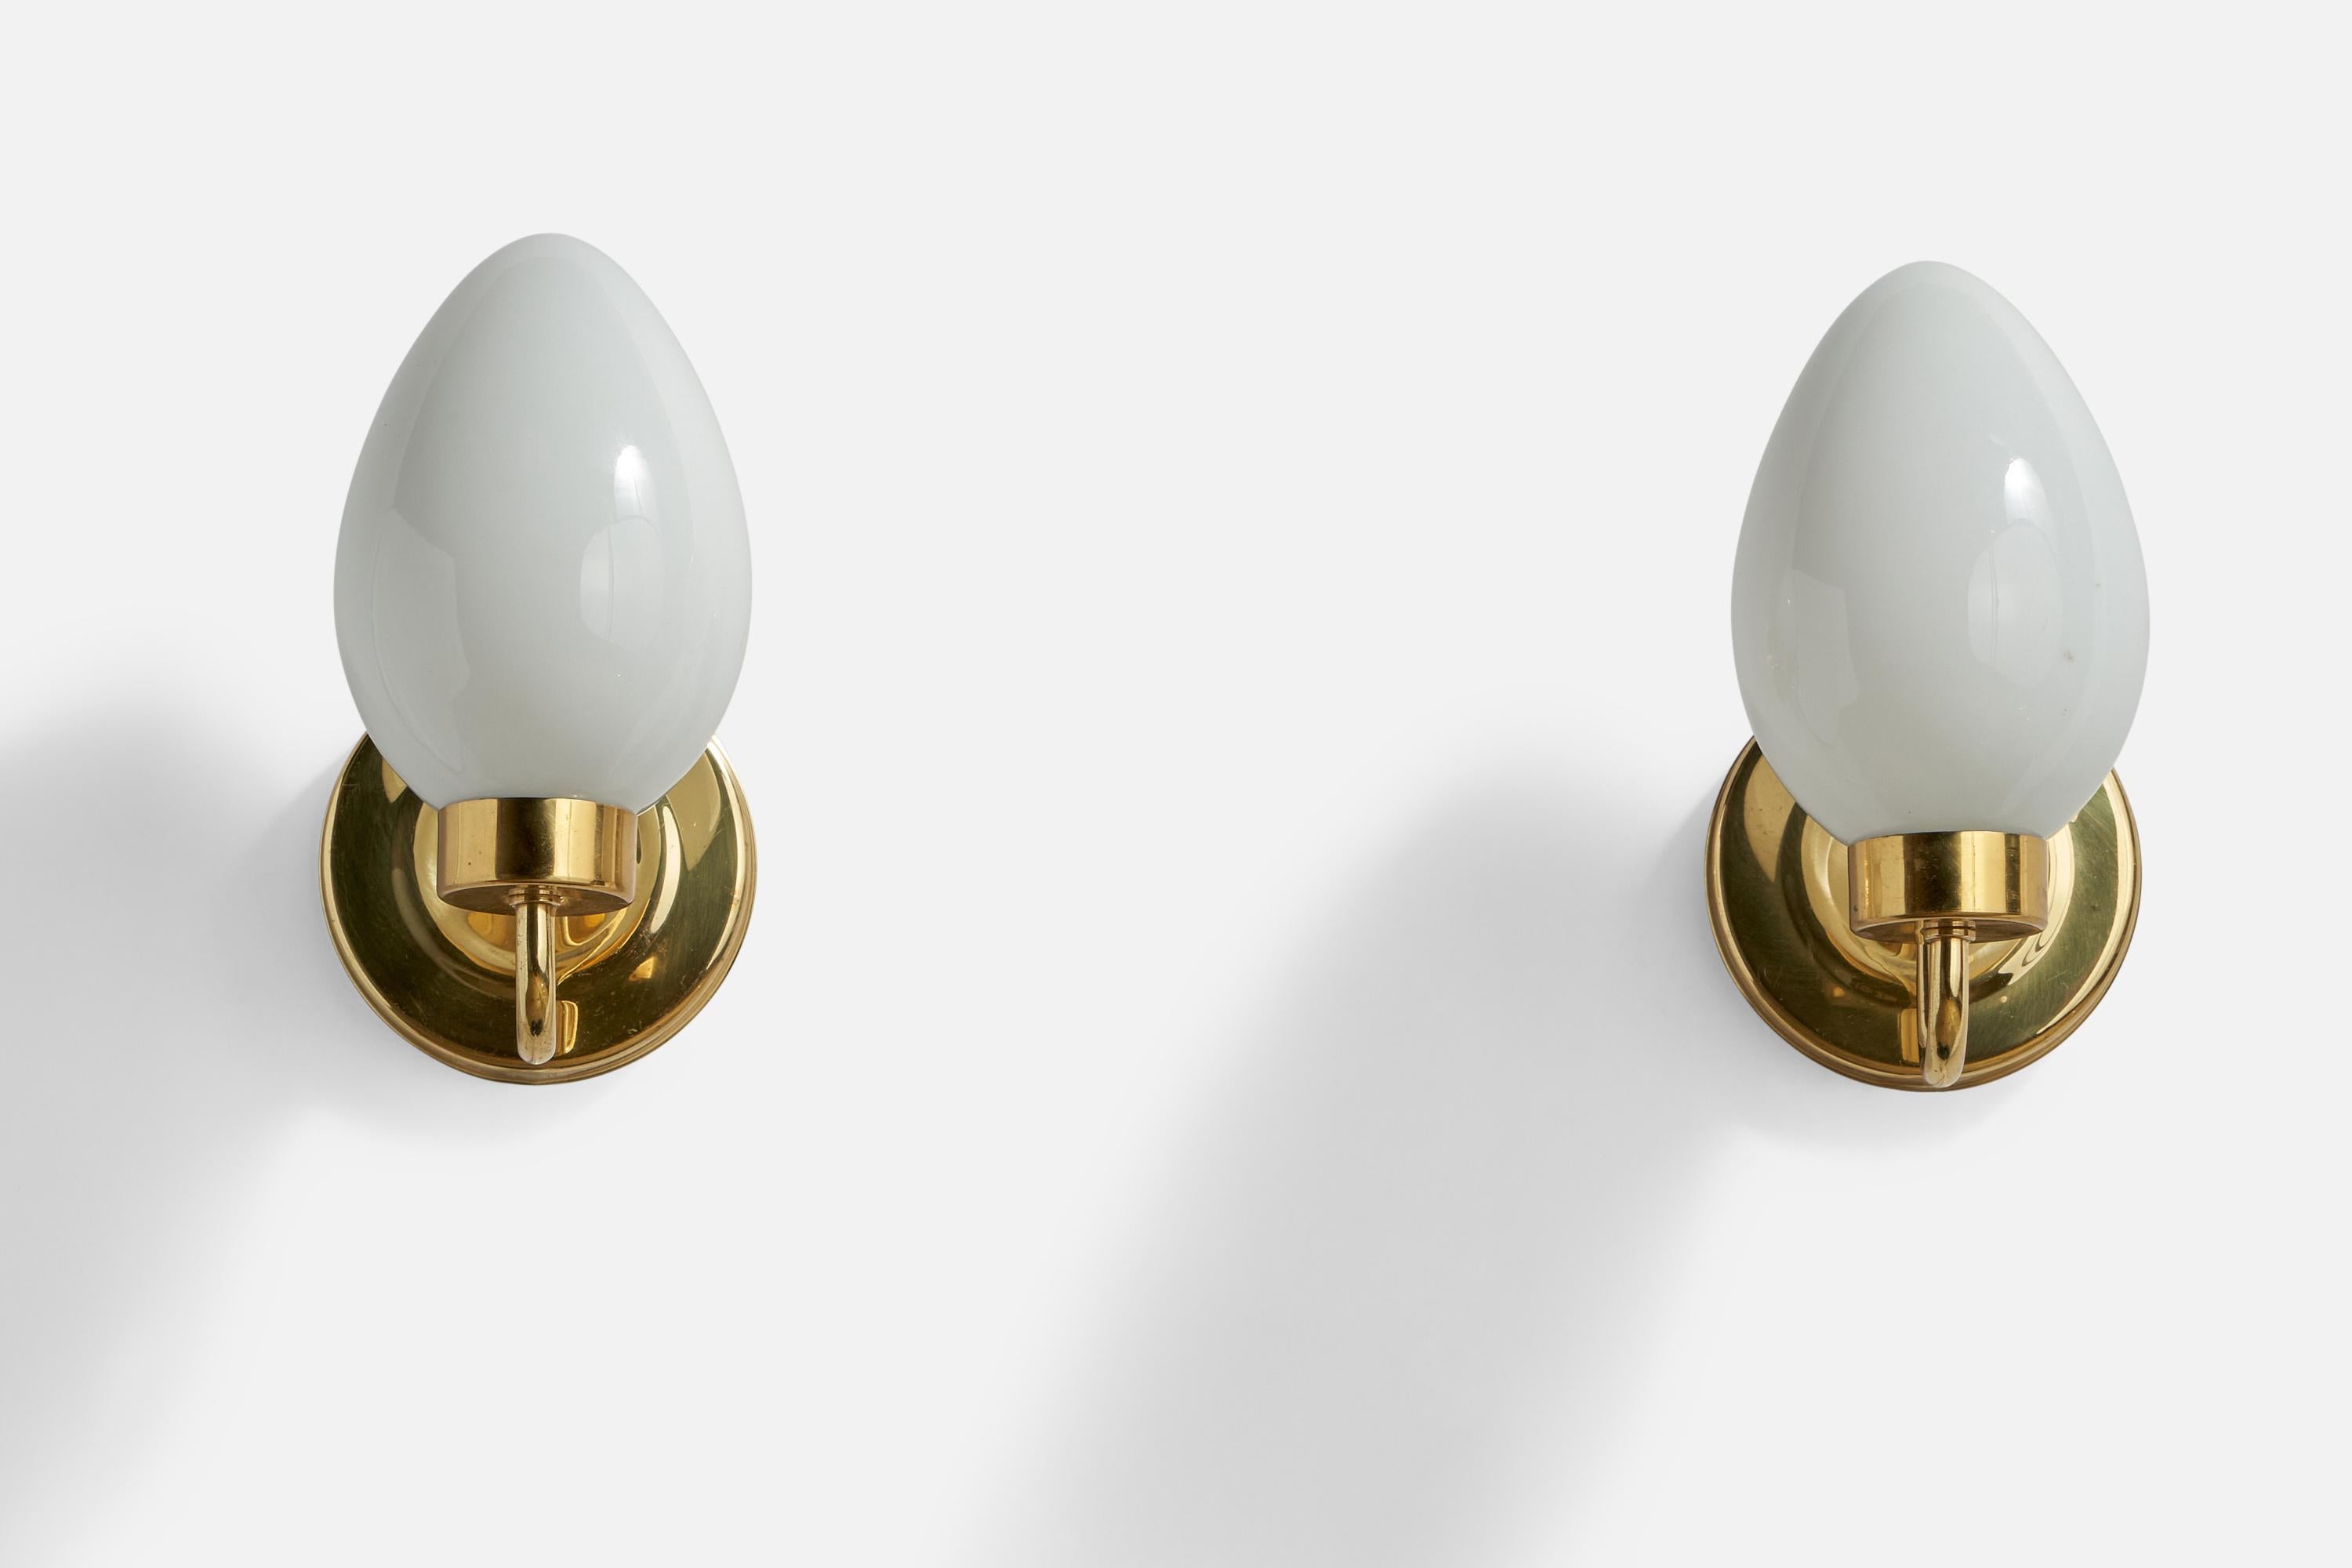 A pair of brass and opaline glass wall lights designed and produced by Abo Randers, Denmark, 1970s.

Overall Dimensions (inches): 8.5” H x 4.3” W x 6” D
Back Plate Dimensions (inches): 4.3” Diameter x 0.65” Depth
Bulb Specifications: E-14